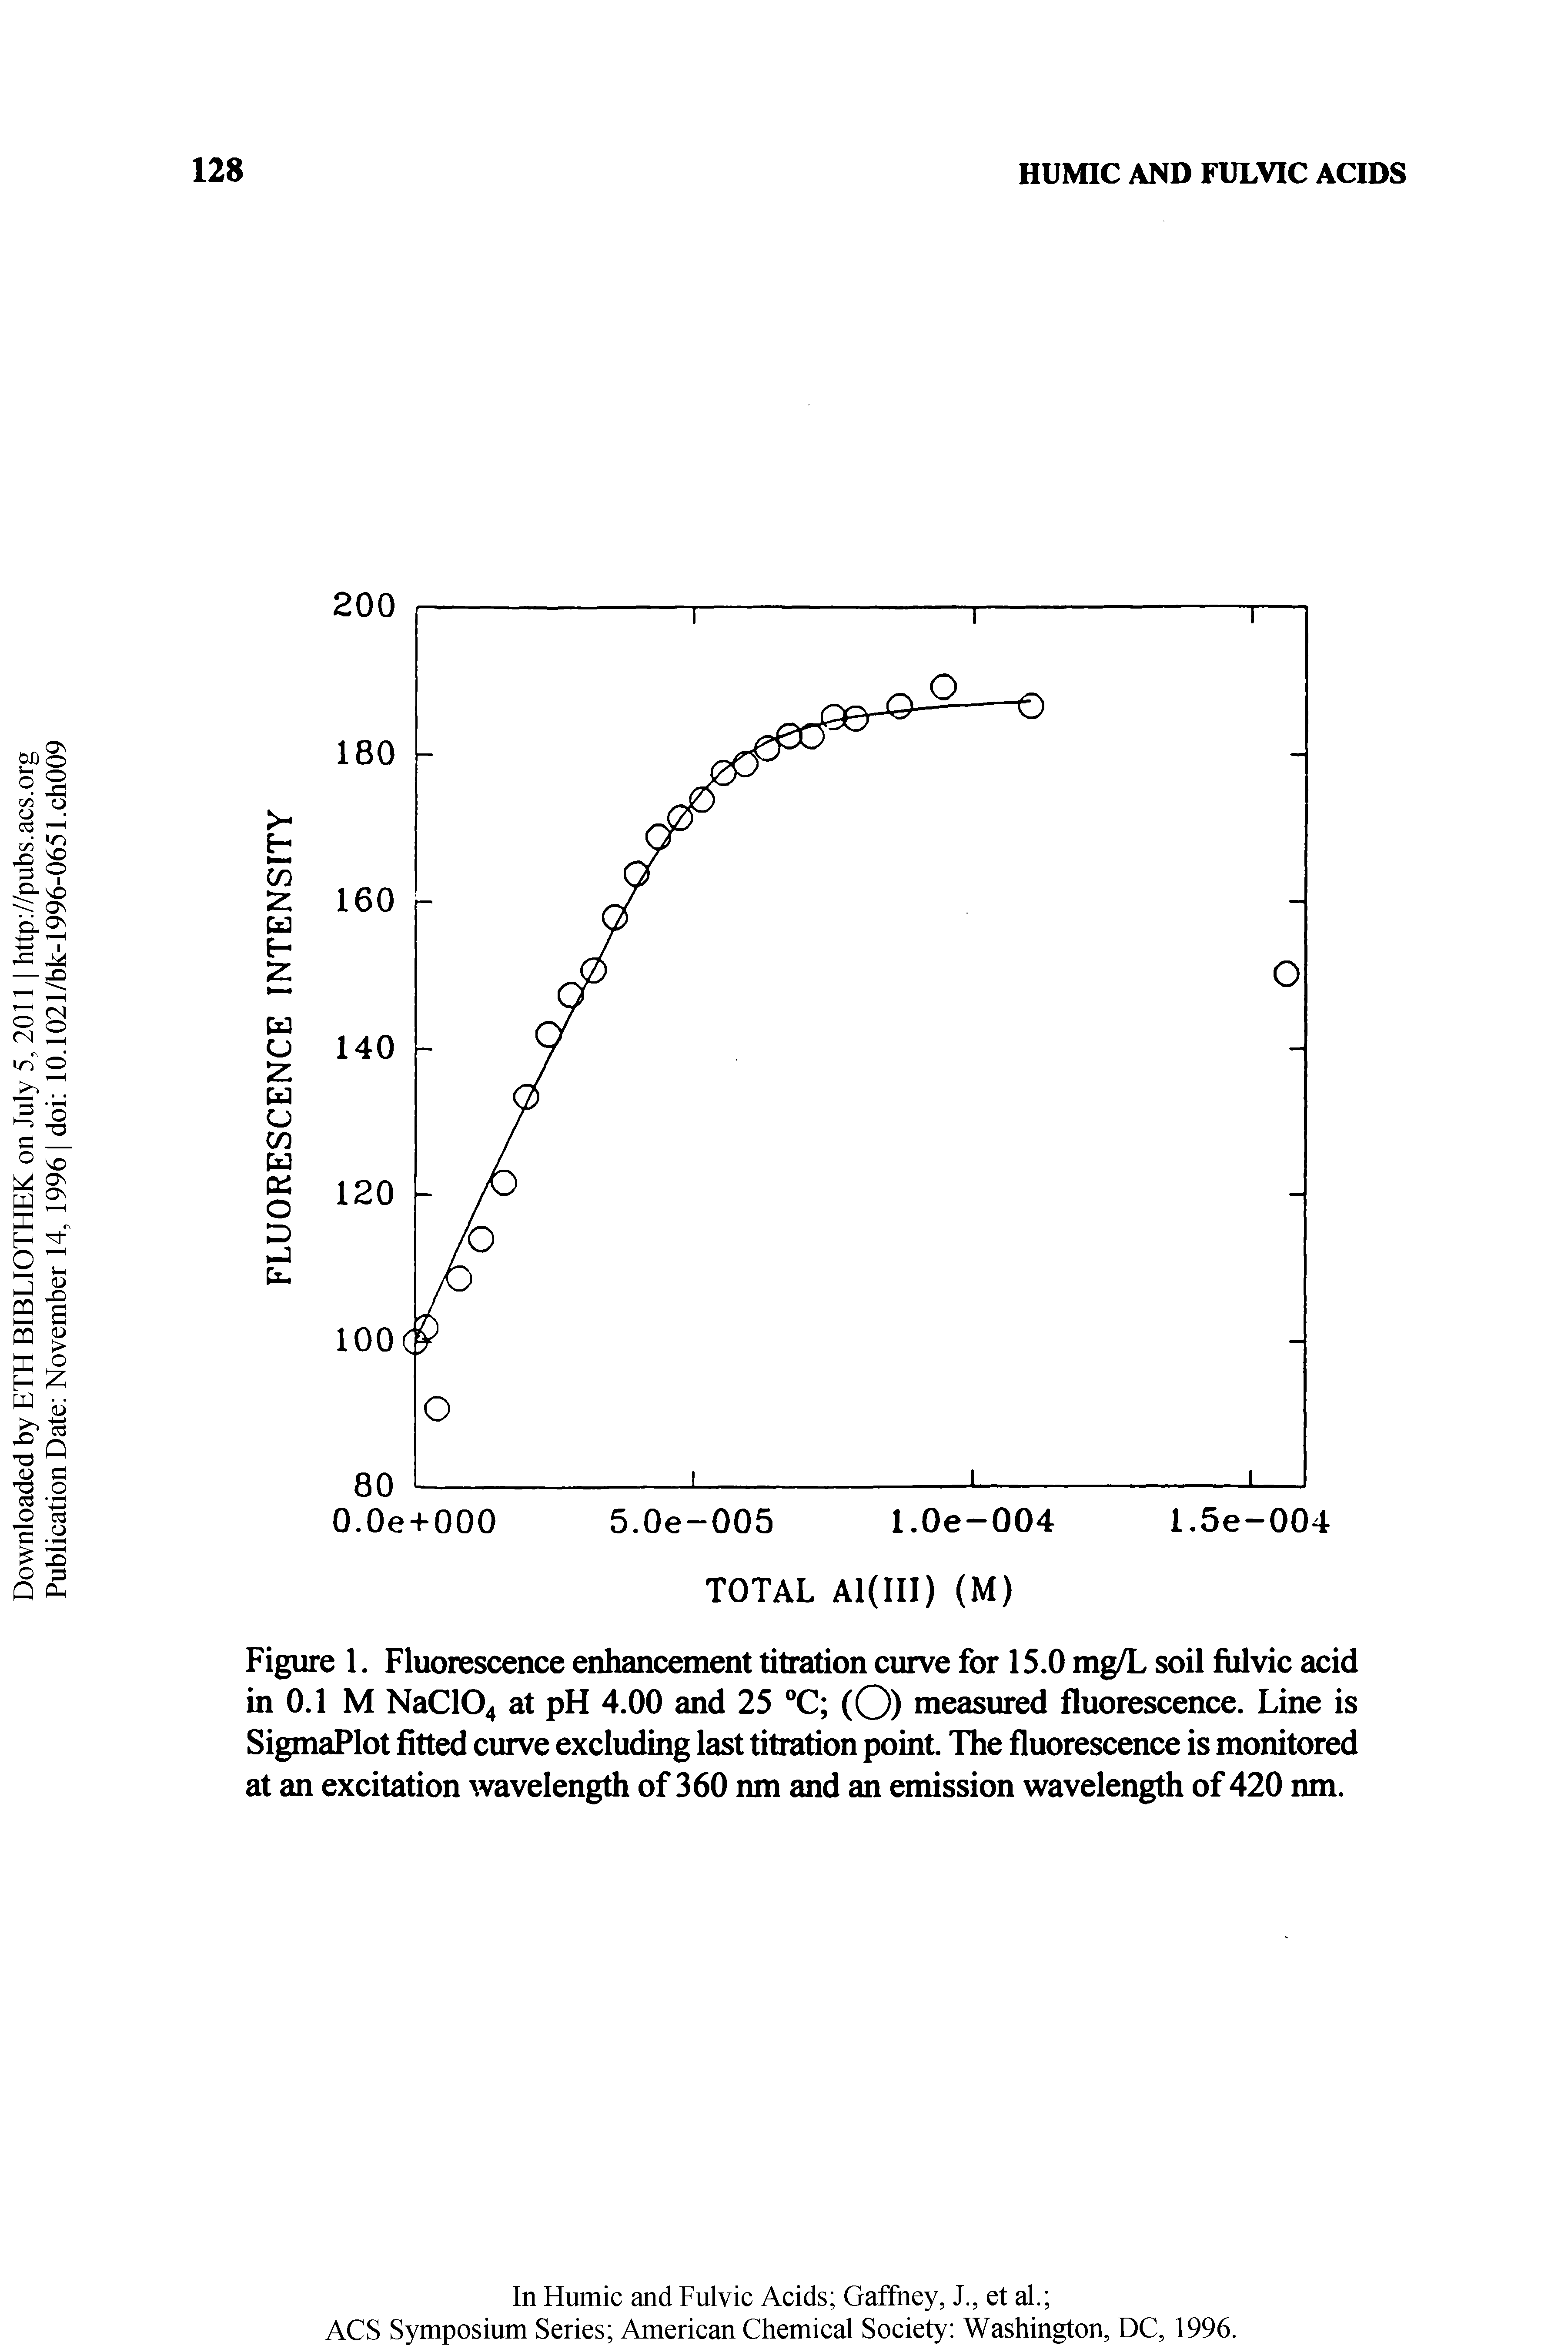 Figure 1. Fluorescence enhancement titration curve for 15.0 mg/L soil fulvic acid in 0.1 M NaC104 at pH 4.00 and 25 °C (O) measured fluorescence. Line is SigmaPlot fitted curve excluding last titration point. The fluorescence is monitored at an excitation wavelength of 360 nm and an emission wavelength of420 nm.